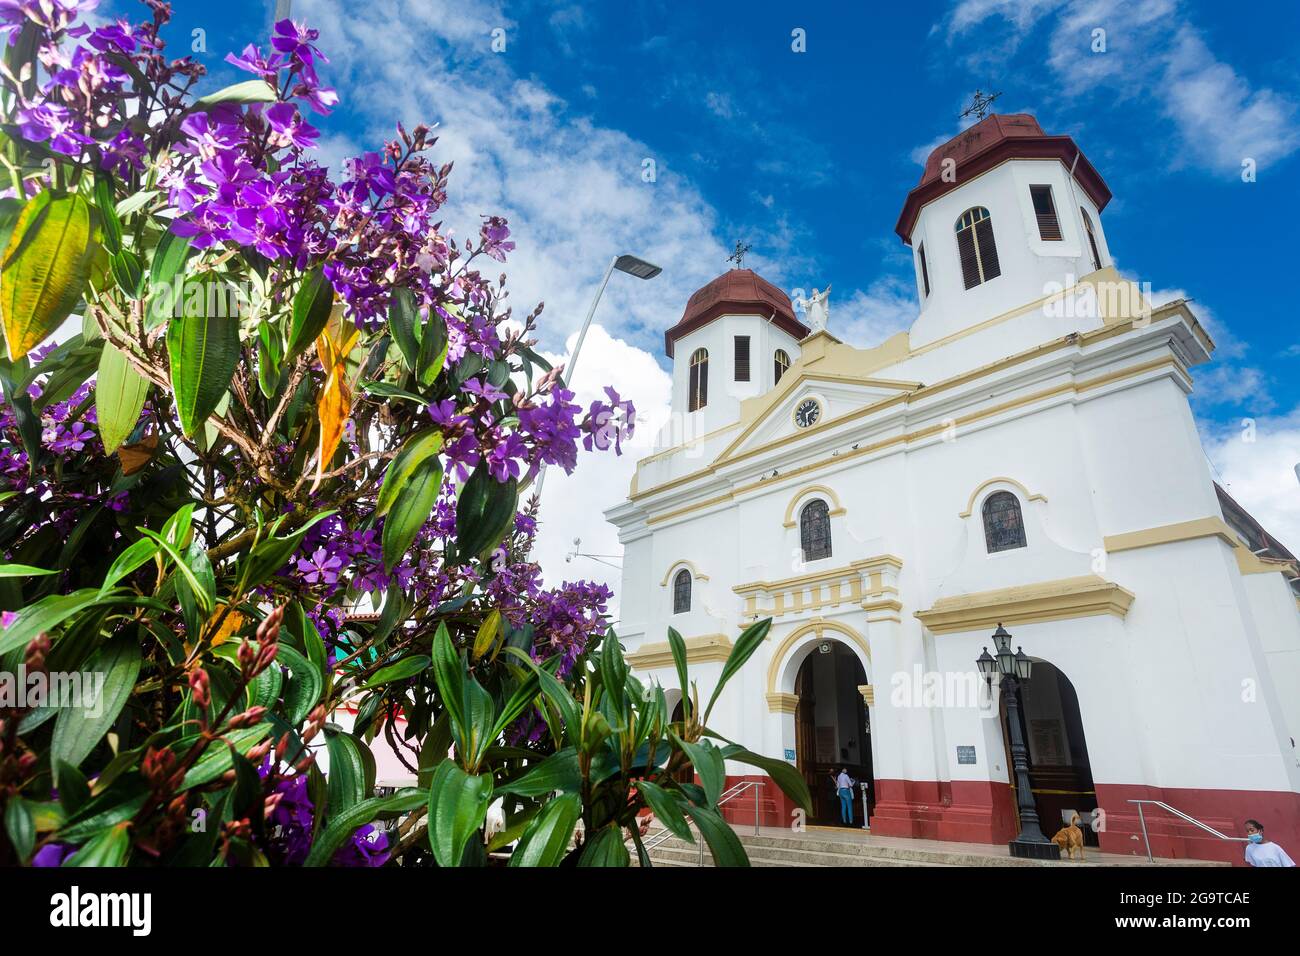 San Vicente Ferrer, Antioquia - Colombia. July 25, 2021. Religious temple of Catholic worship located in the urban area of the municipality Stock Photo